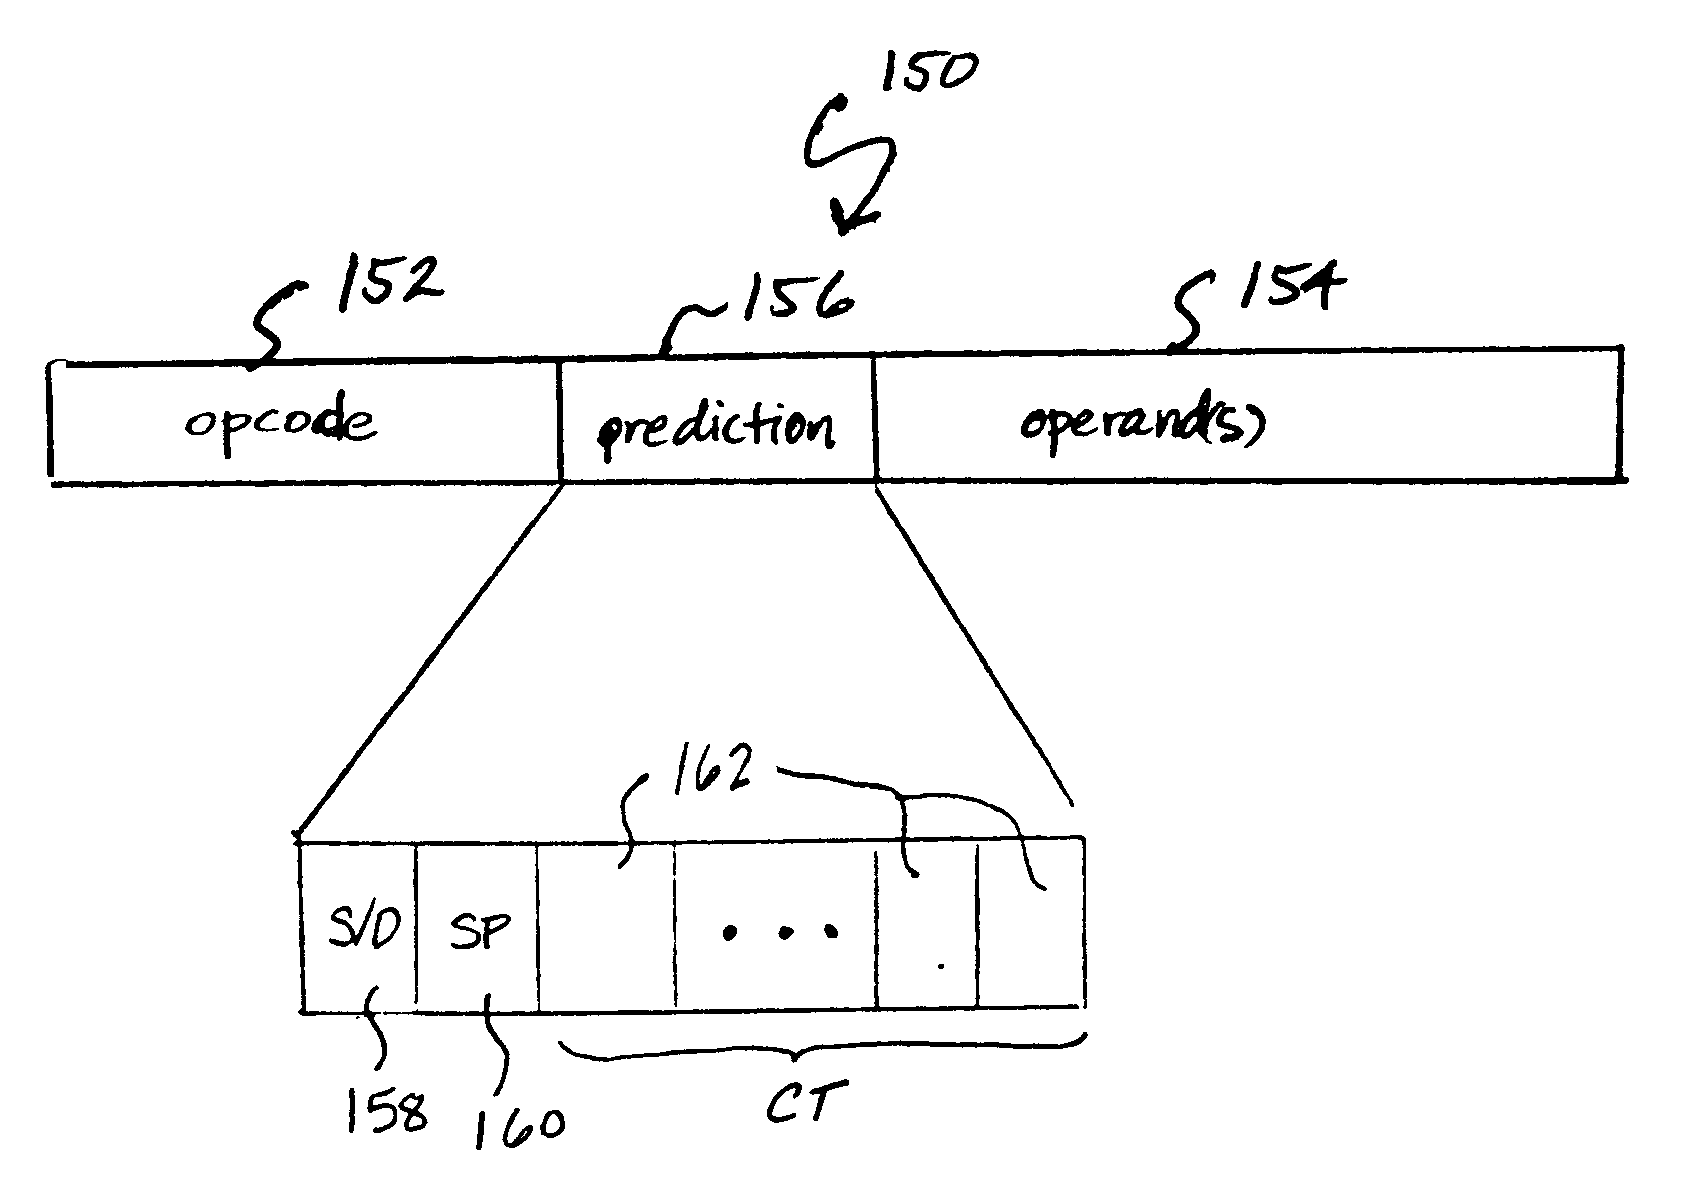 Processor and method that predict condition register-dependent conditional branch instructions utilizing a potentially stale condition register value